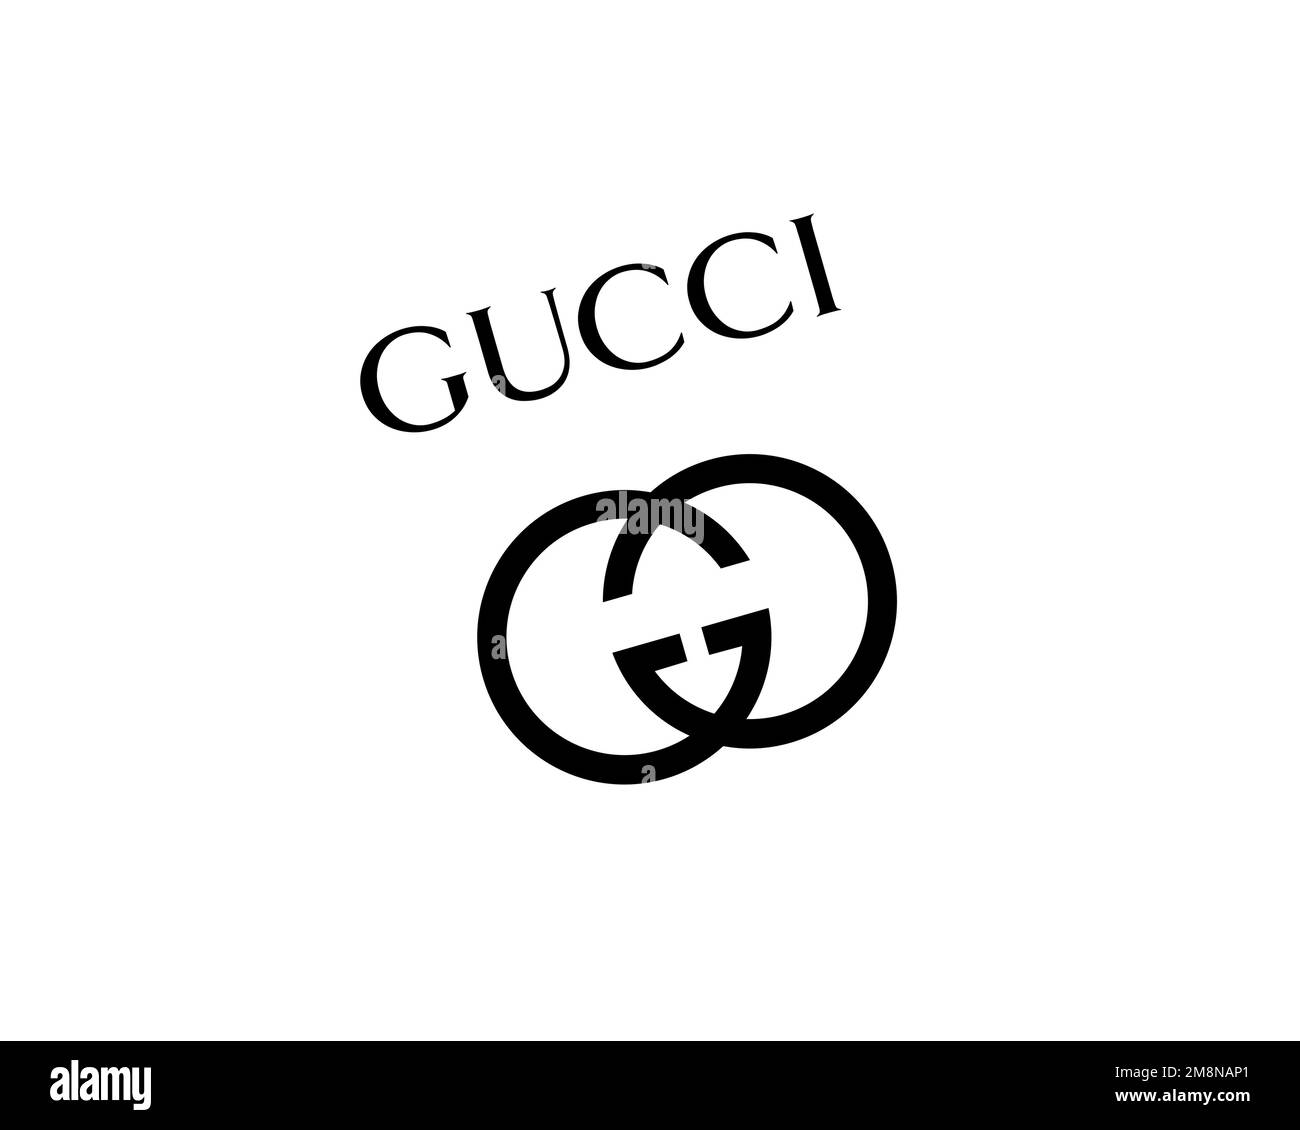 Gucci logo Cut Out Stock Images & Pictures - Alamy